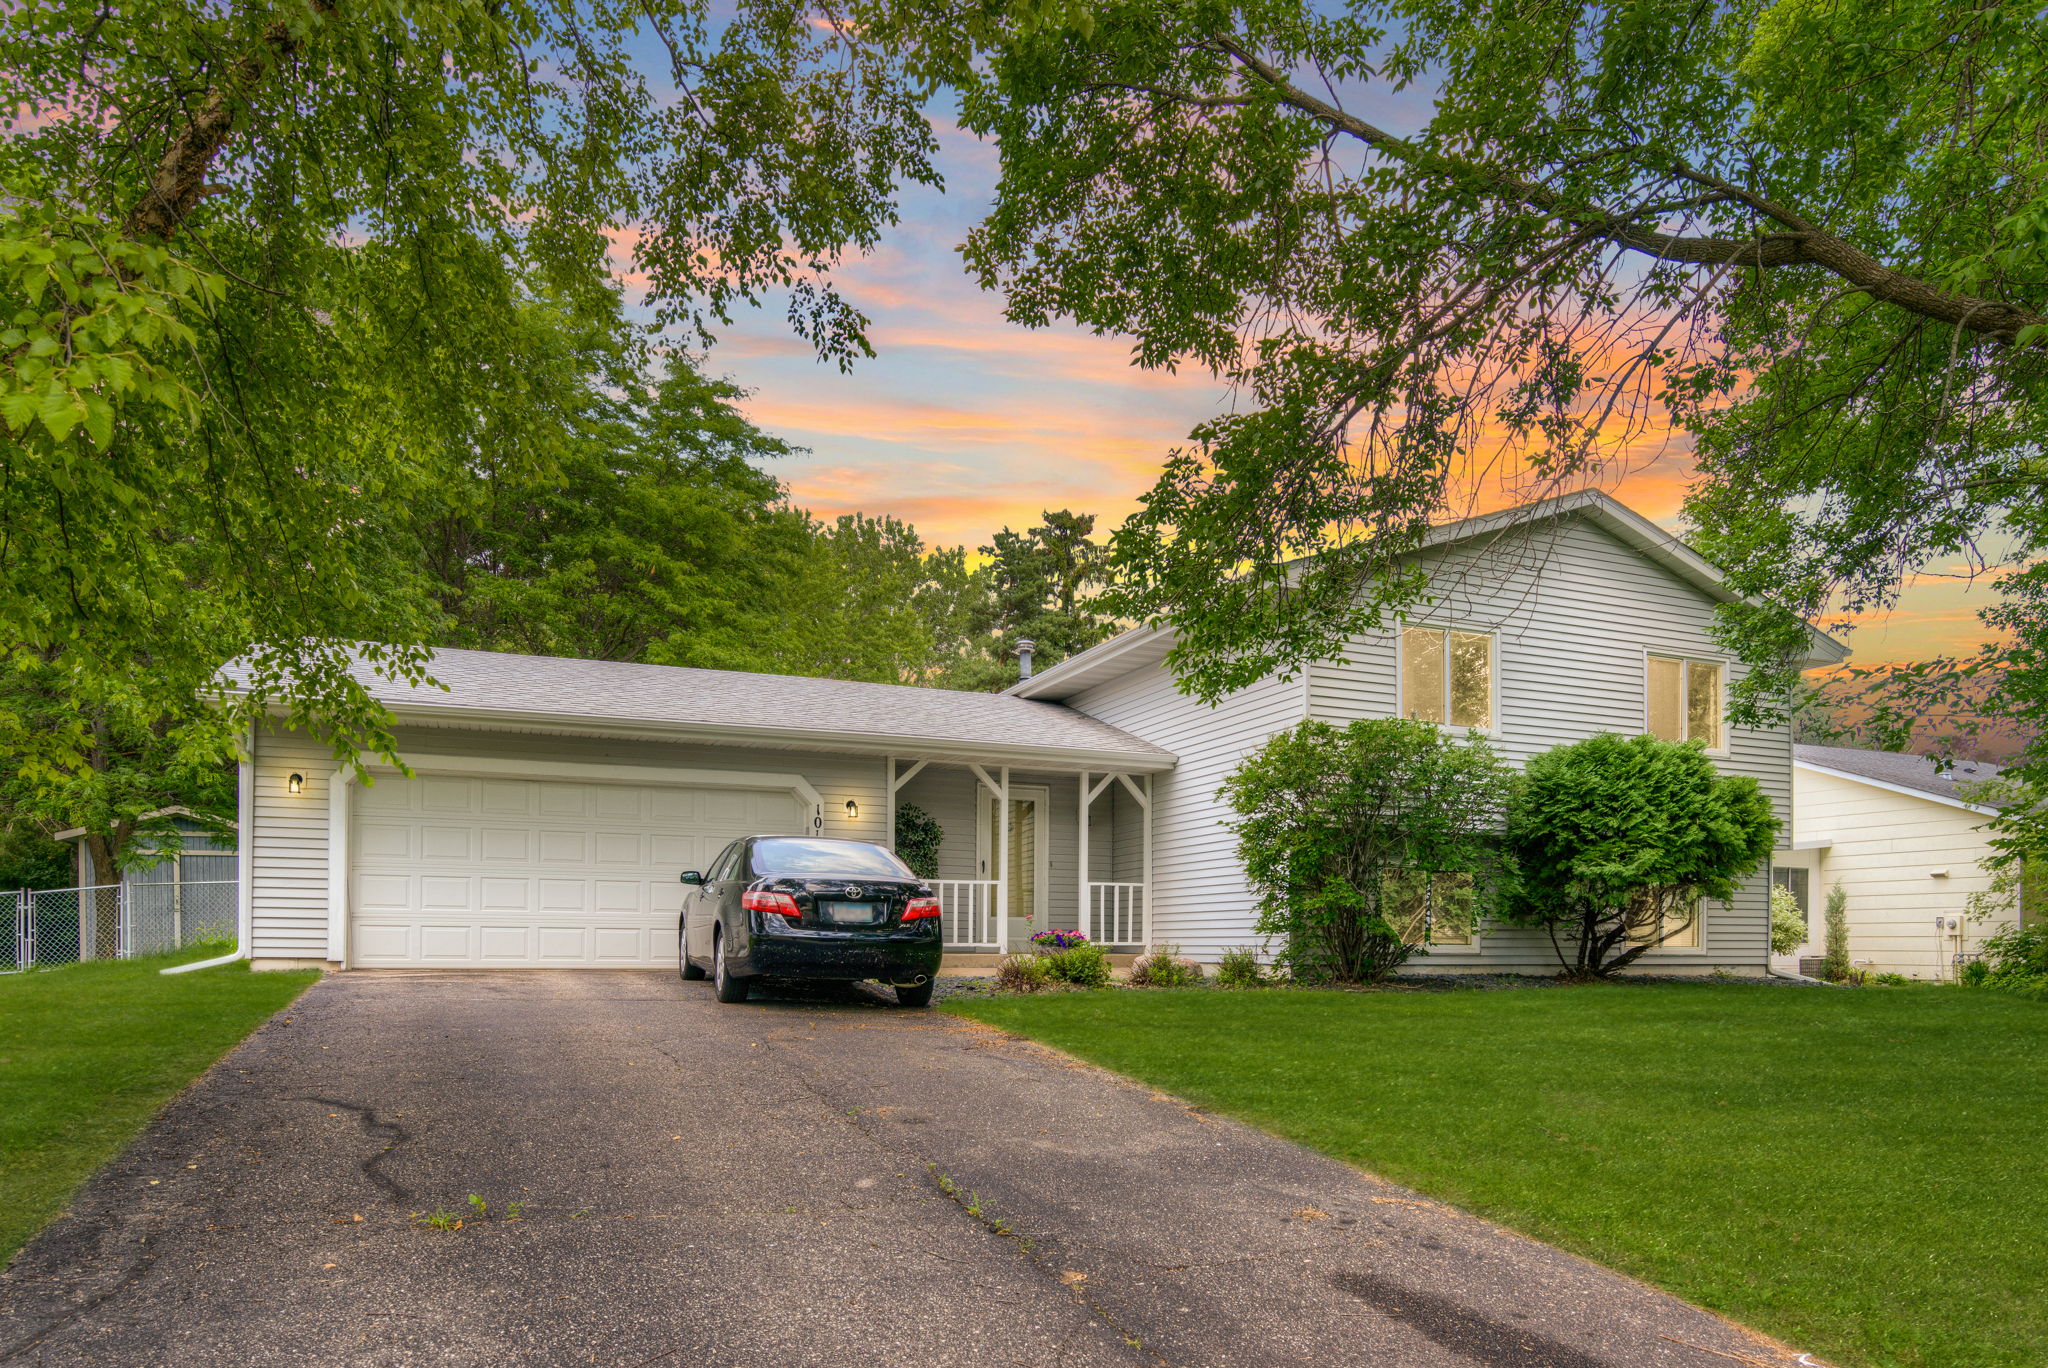  10110 49th Ave N, Plymouth, MN 55442, US Photo 22